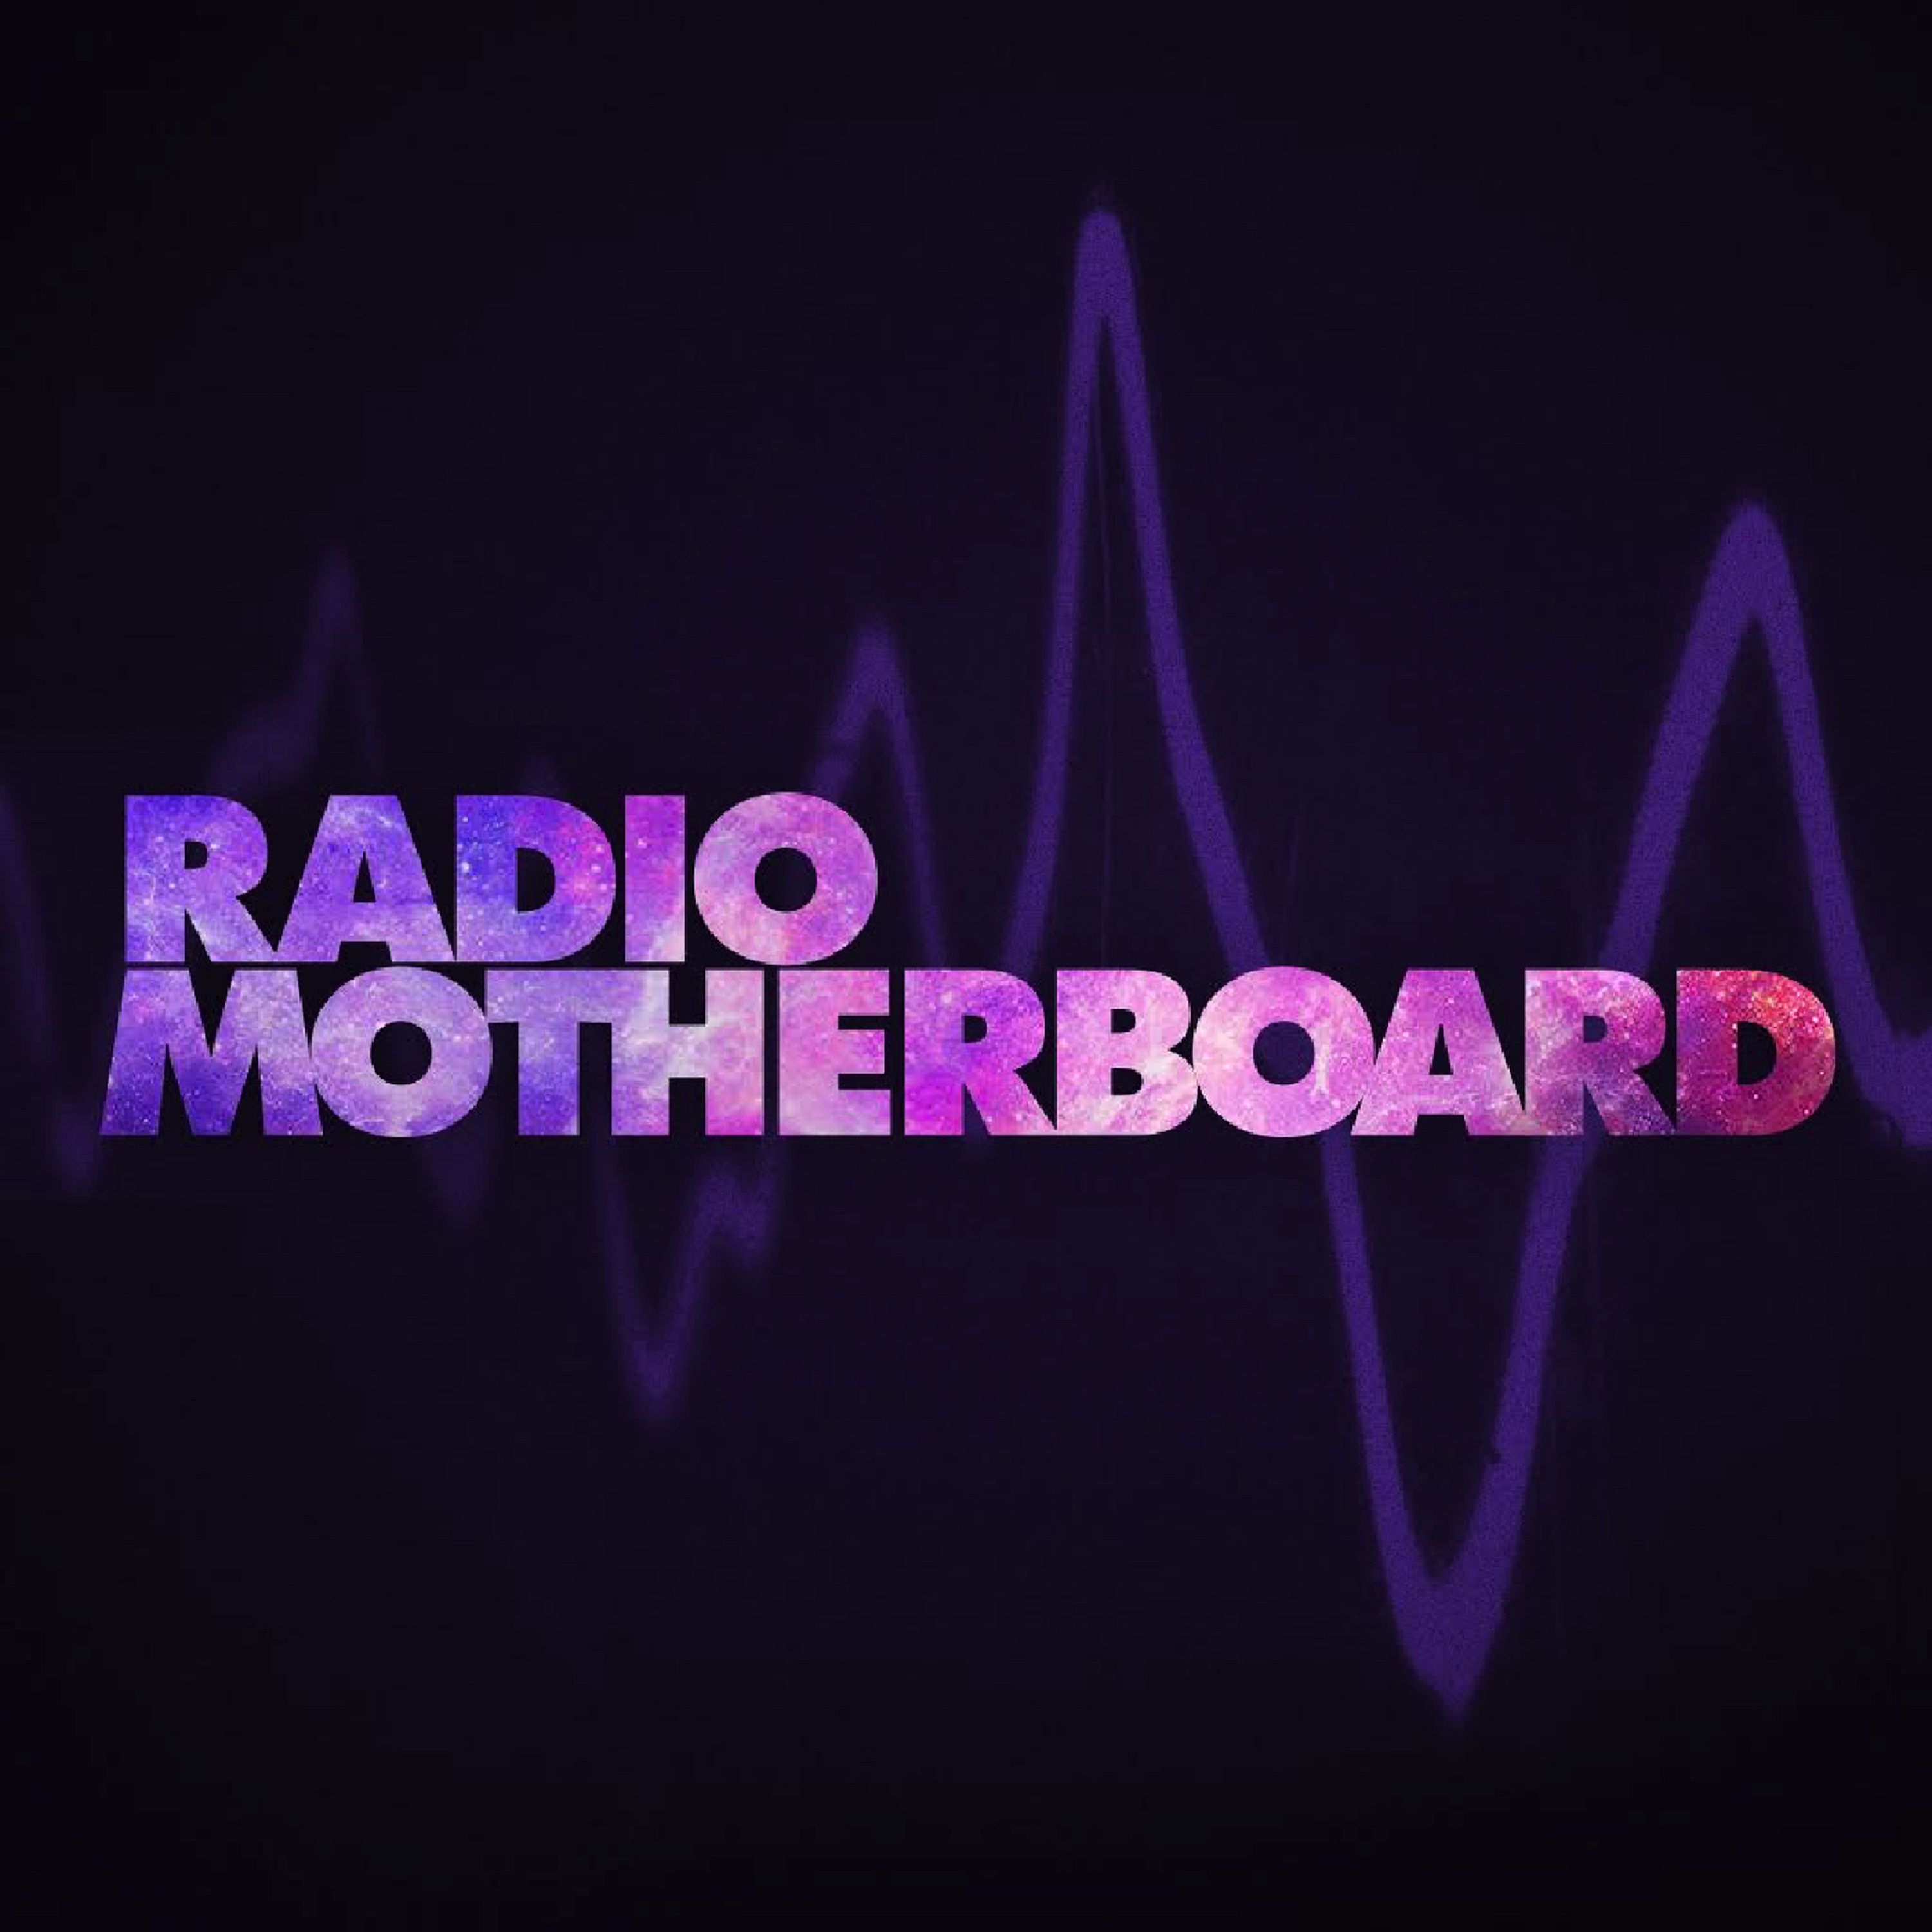 Vote for Motherboard, Come on Our Show!